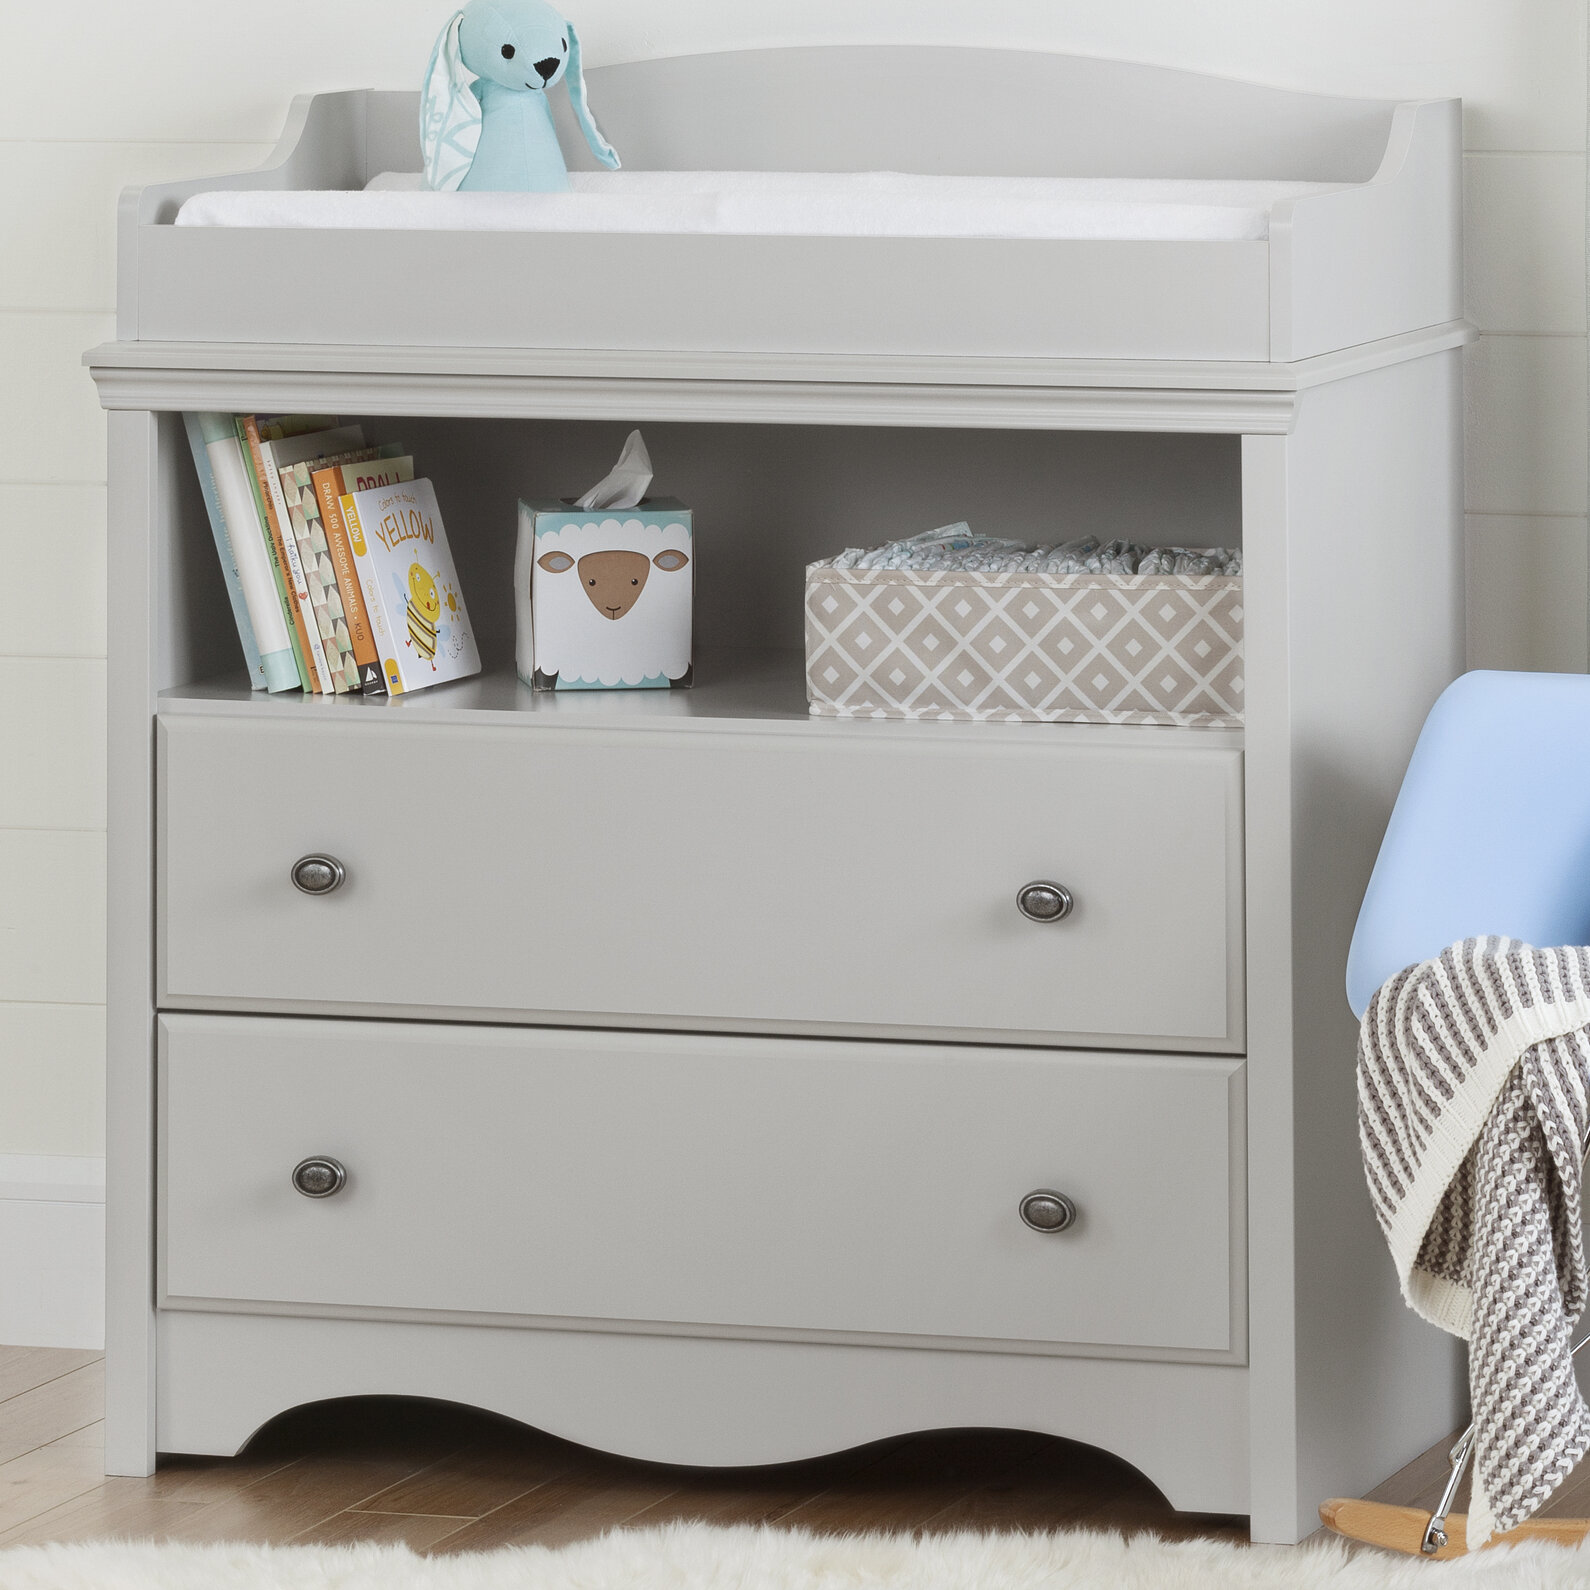 South Shore Angel Soft Grey Changing Table Reviews Wayfair Ca